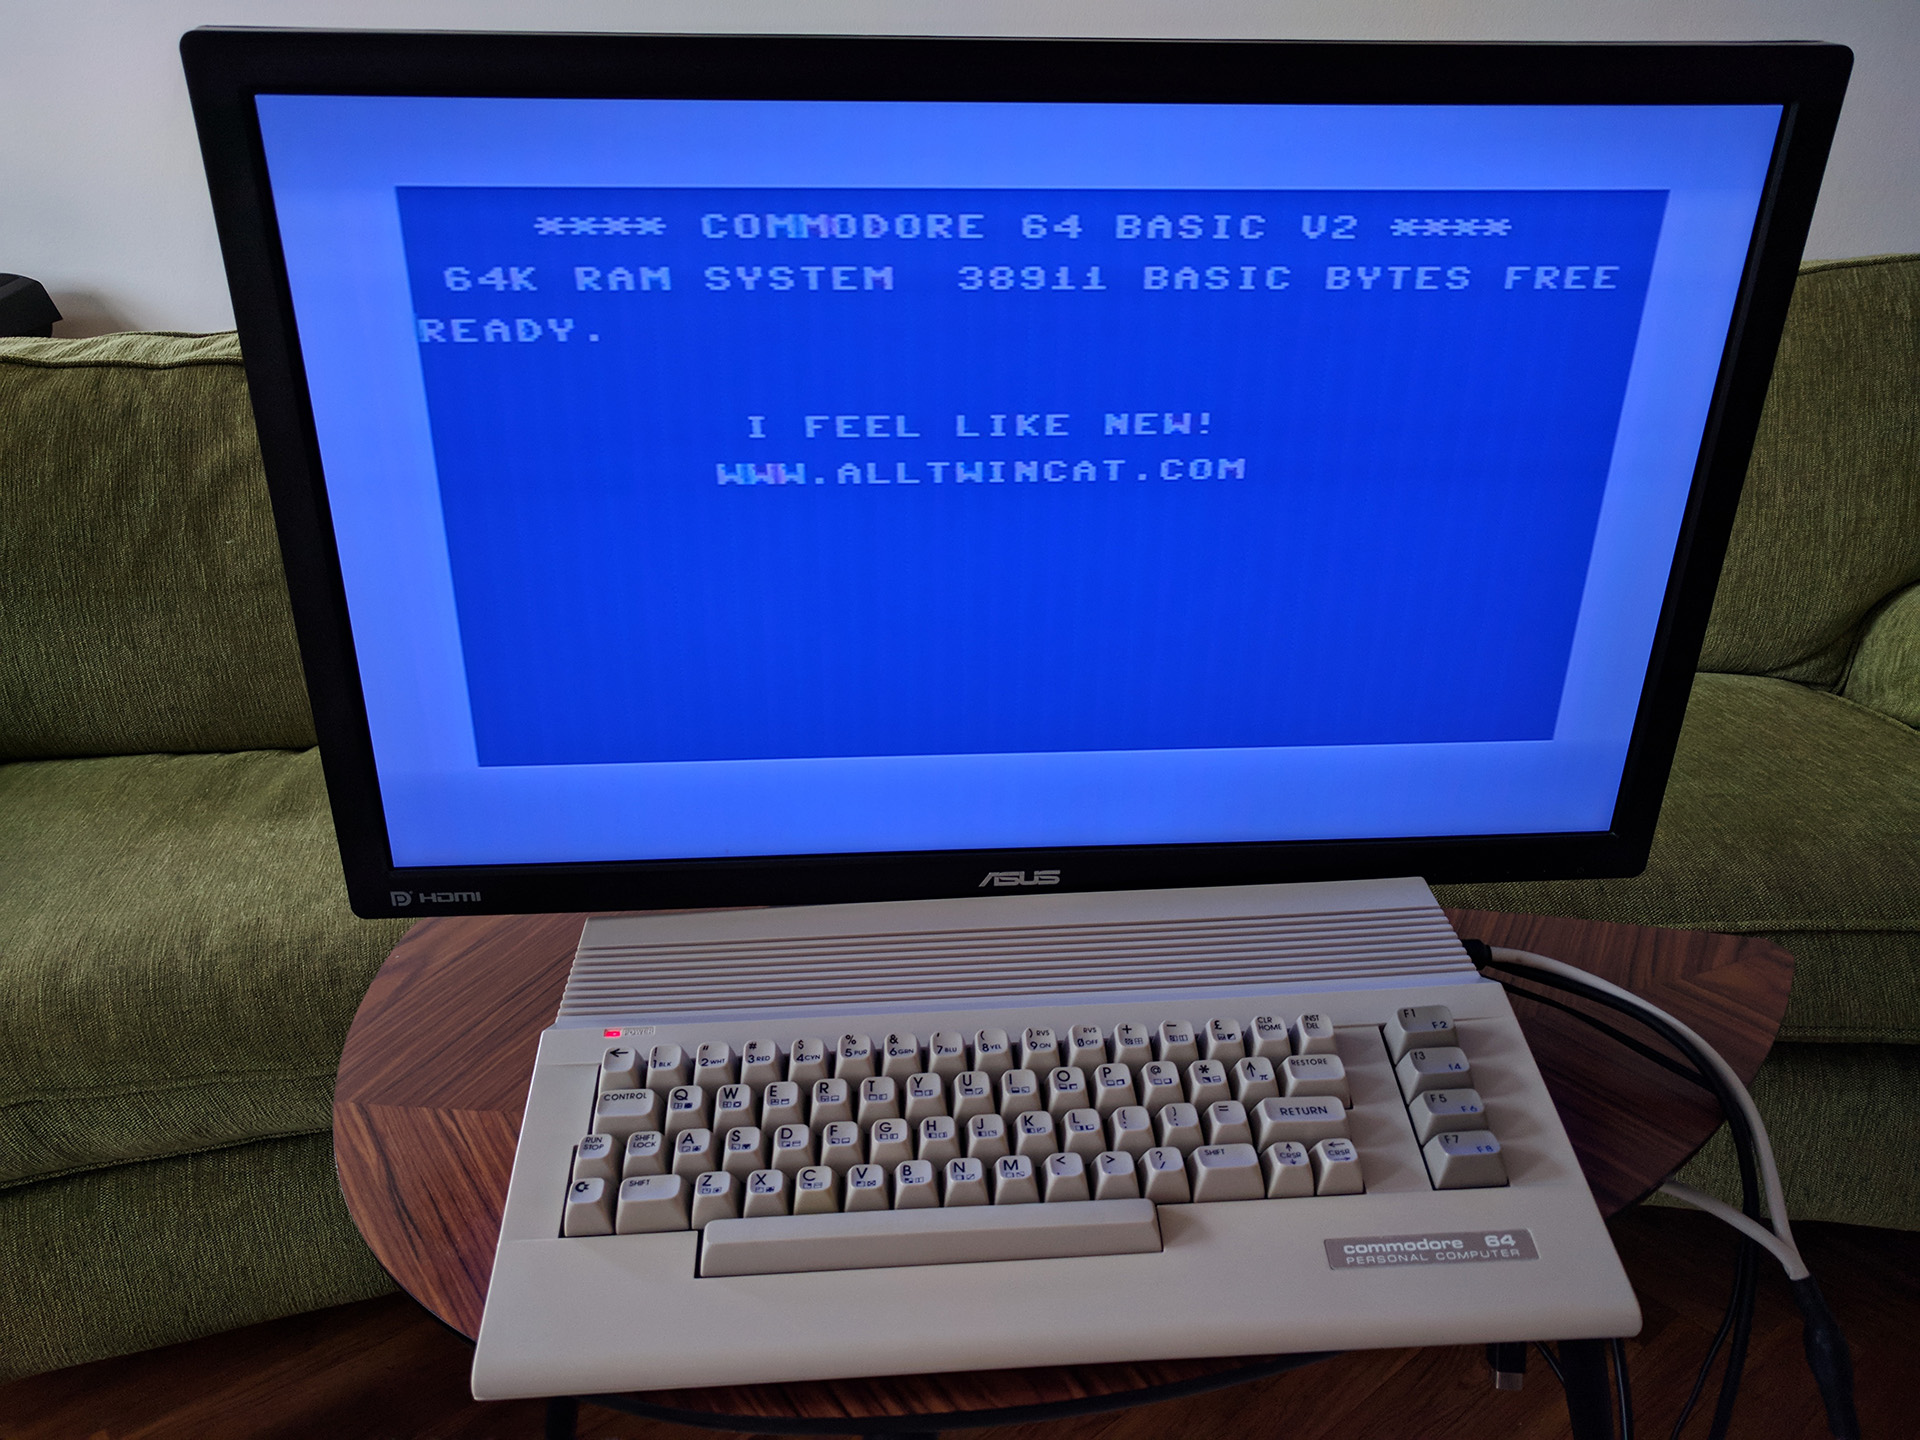 C64 after 6